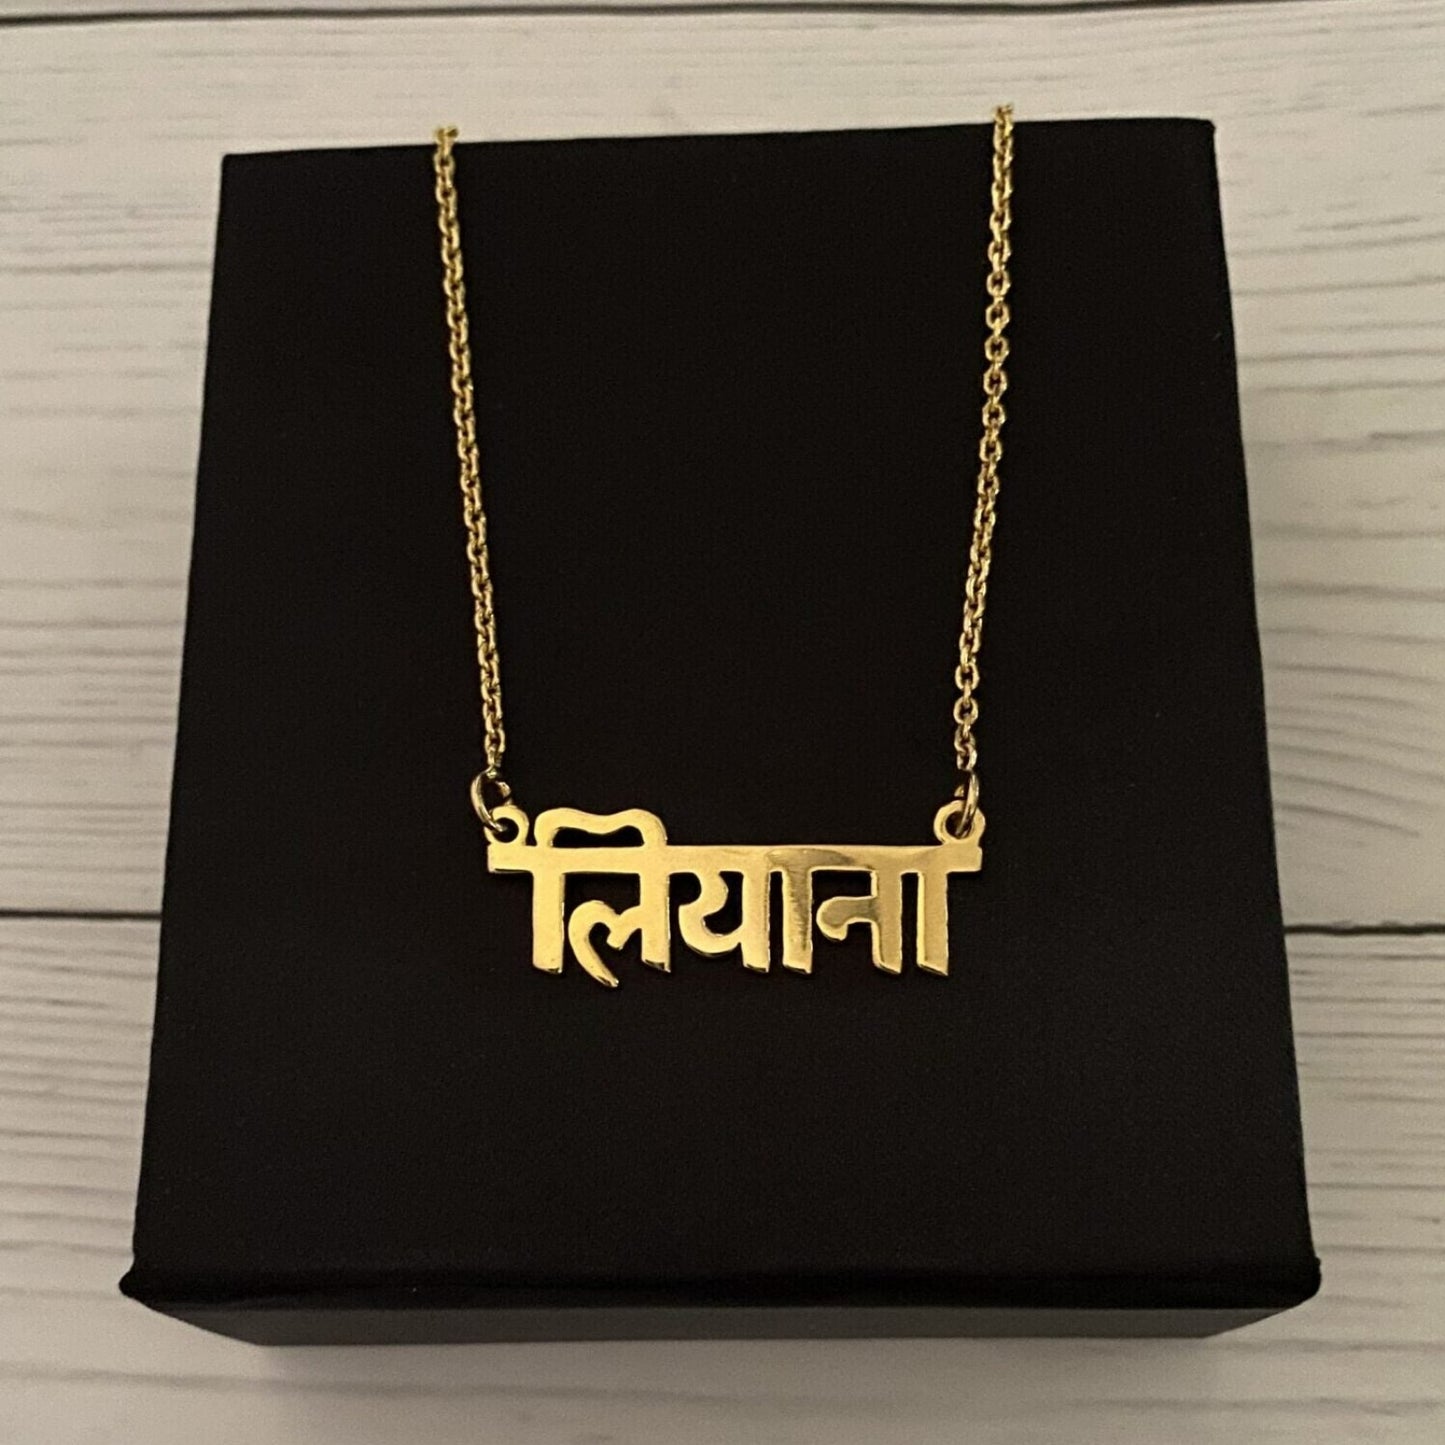 Name Necklace in Hindi 2